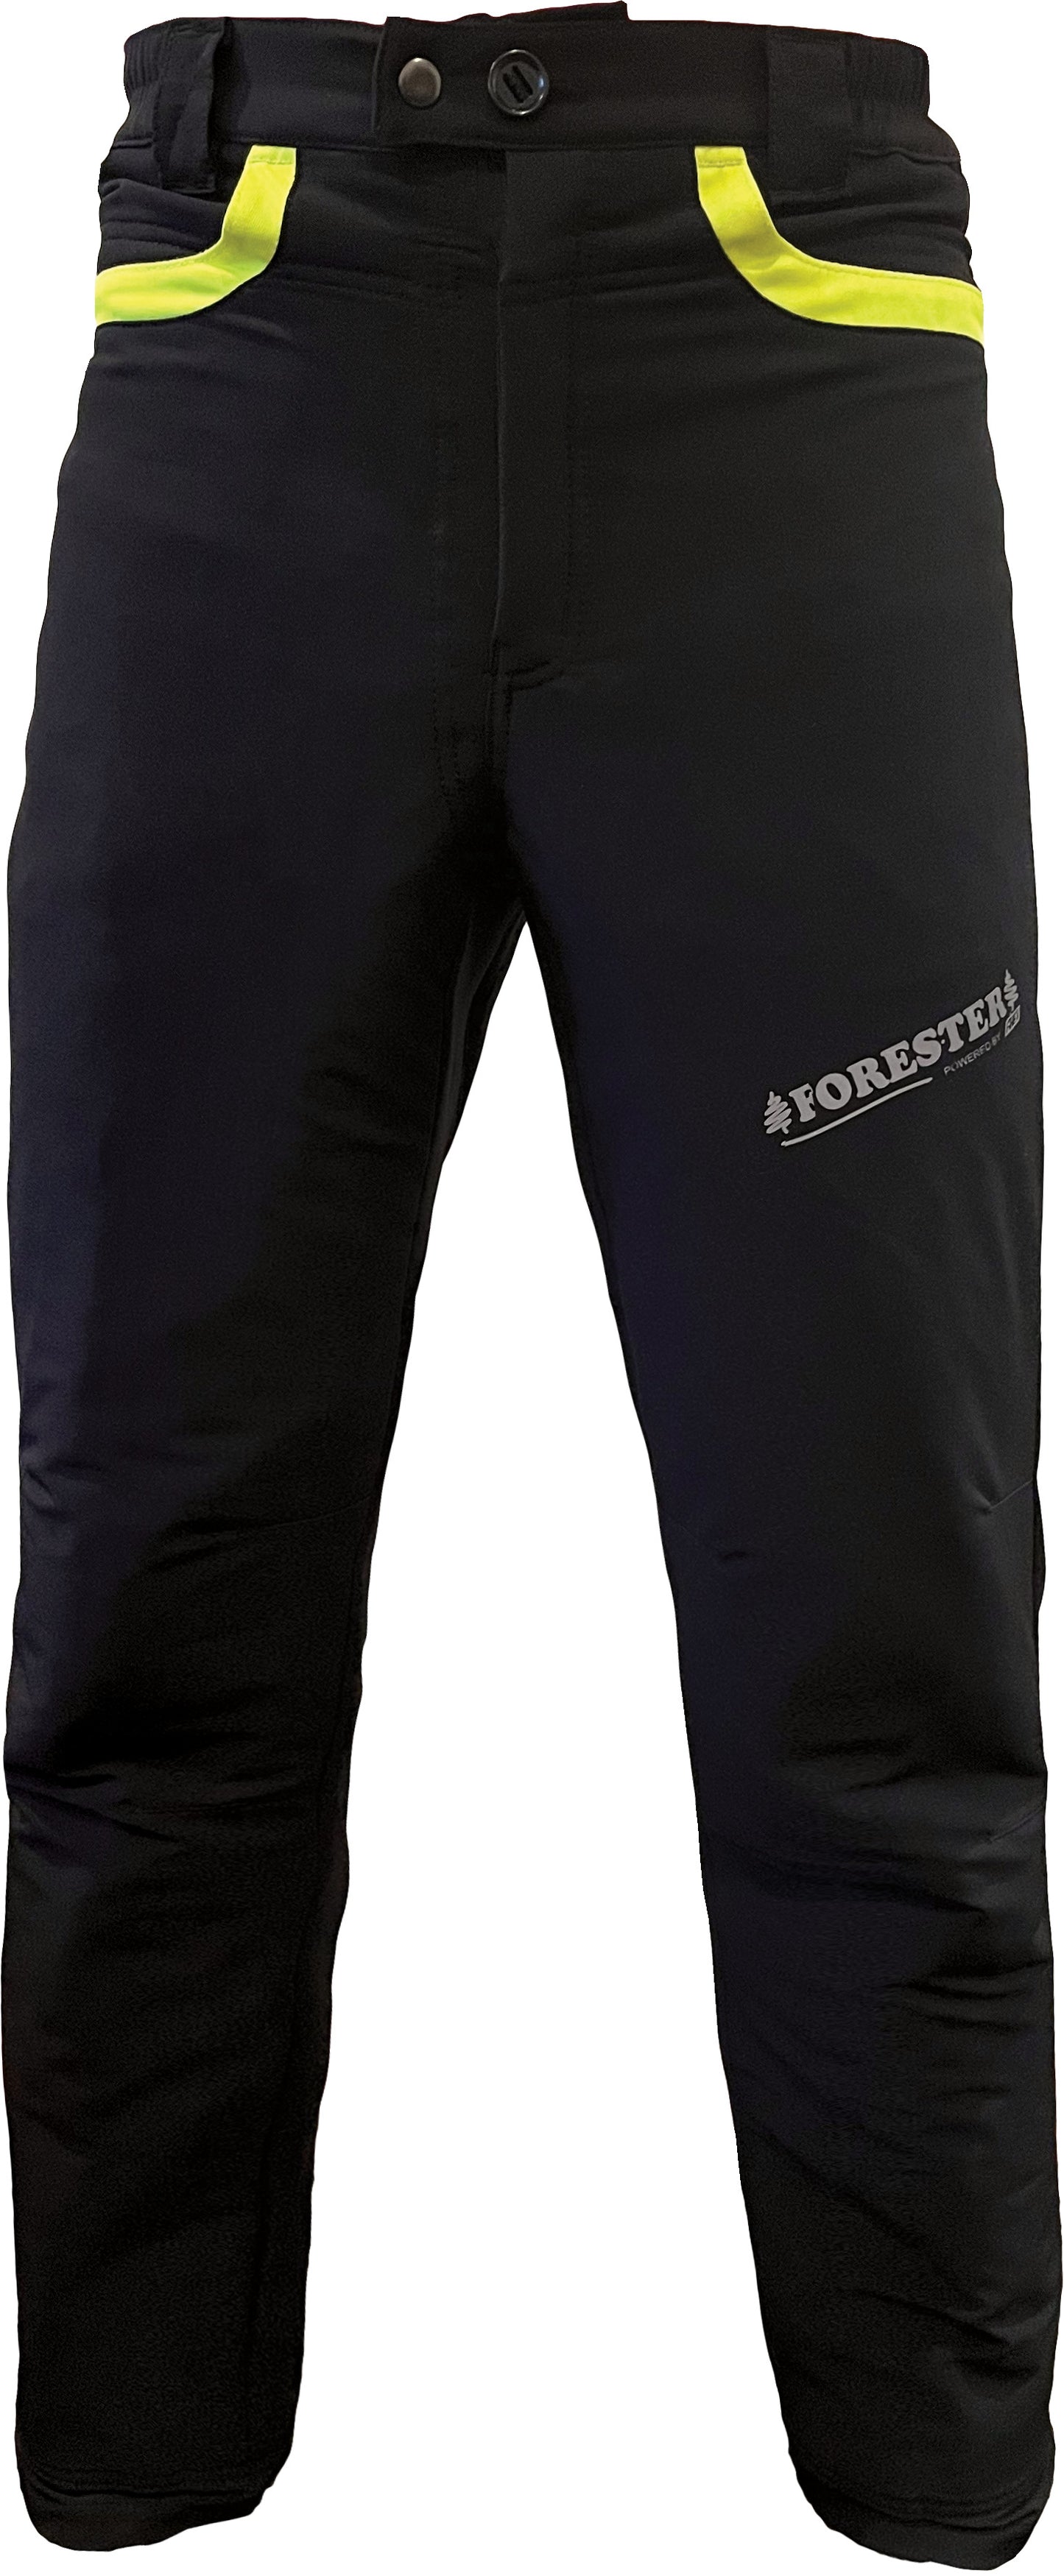 Forester Chainsaw Protective Pants